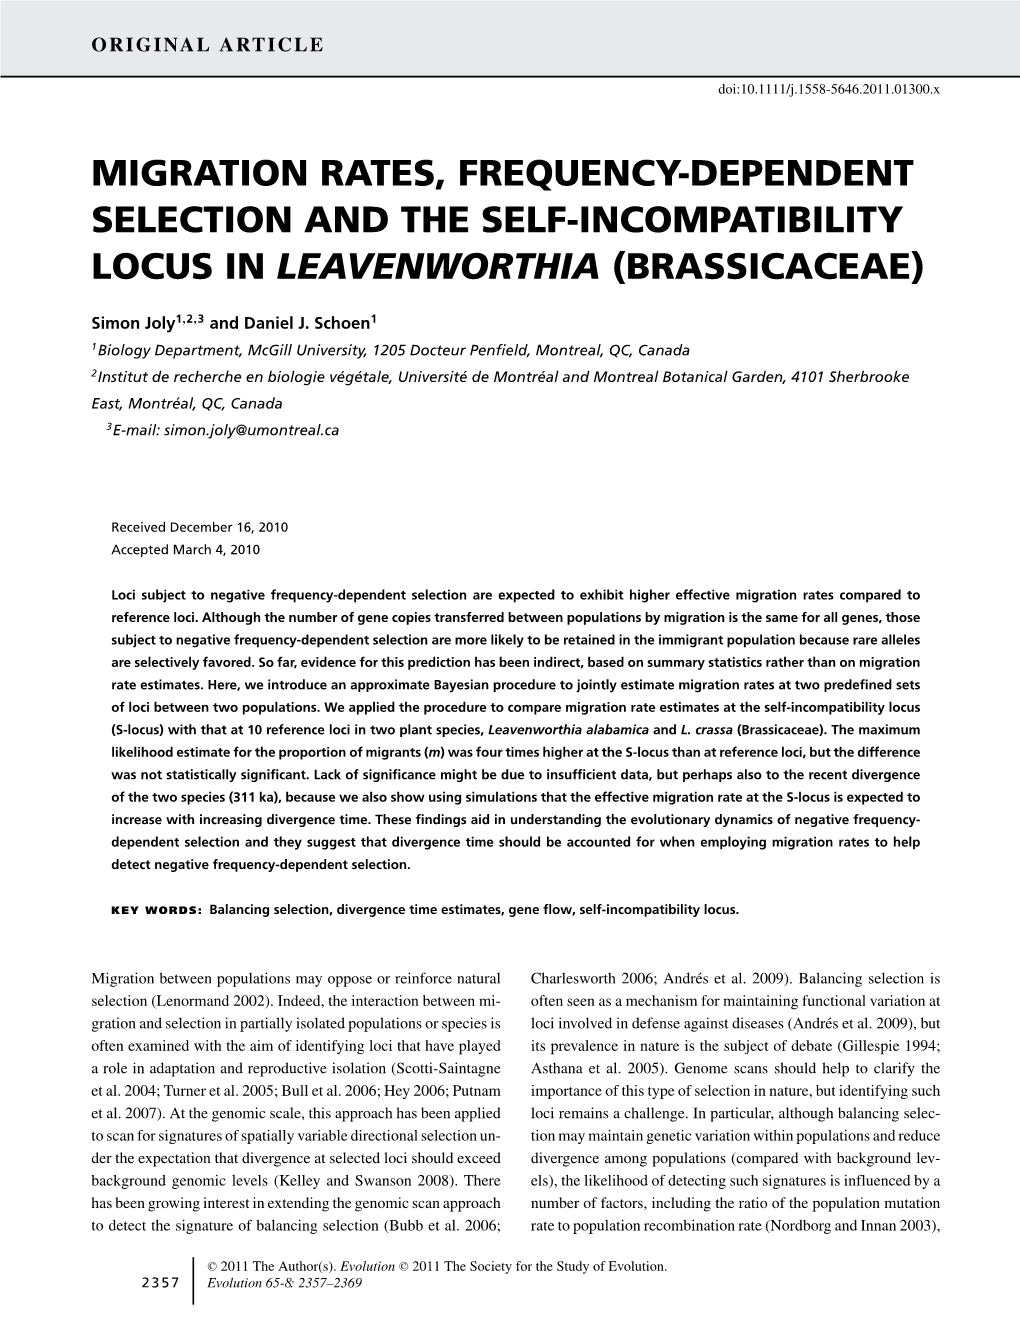 Migration Rates, Frequencydependent